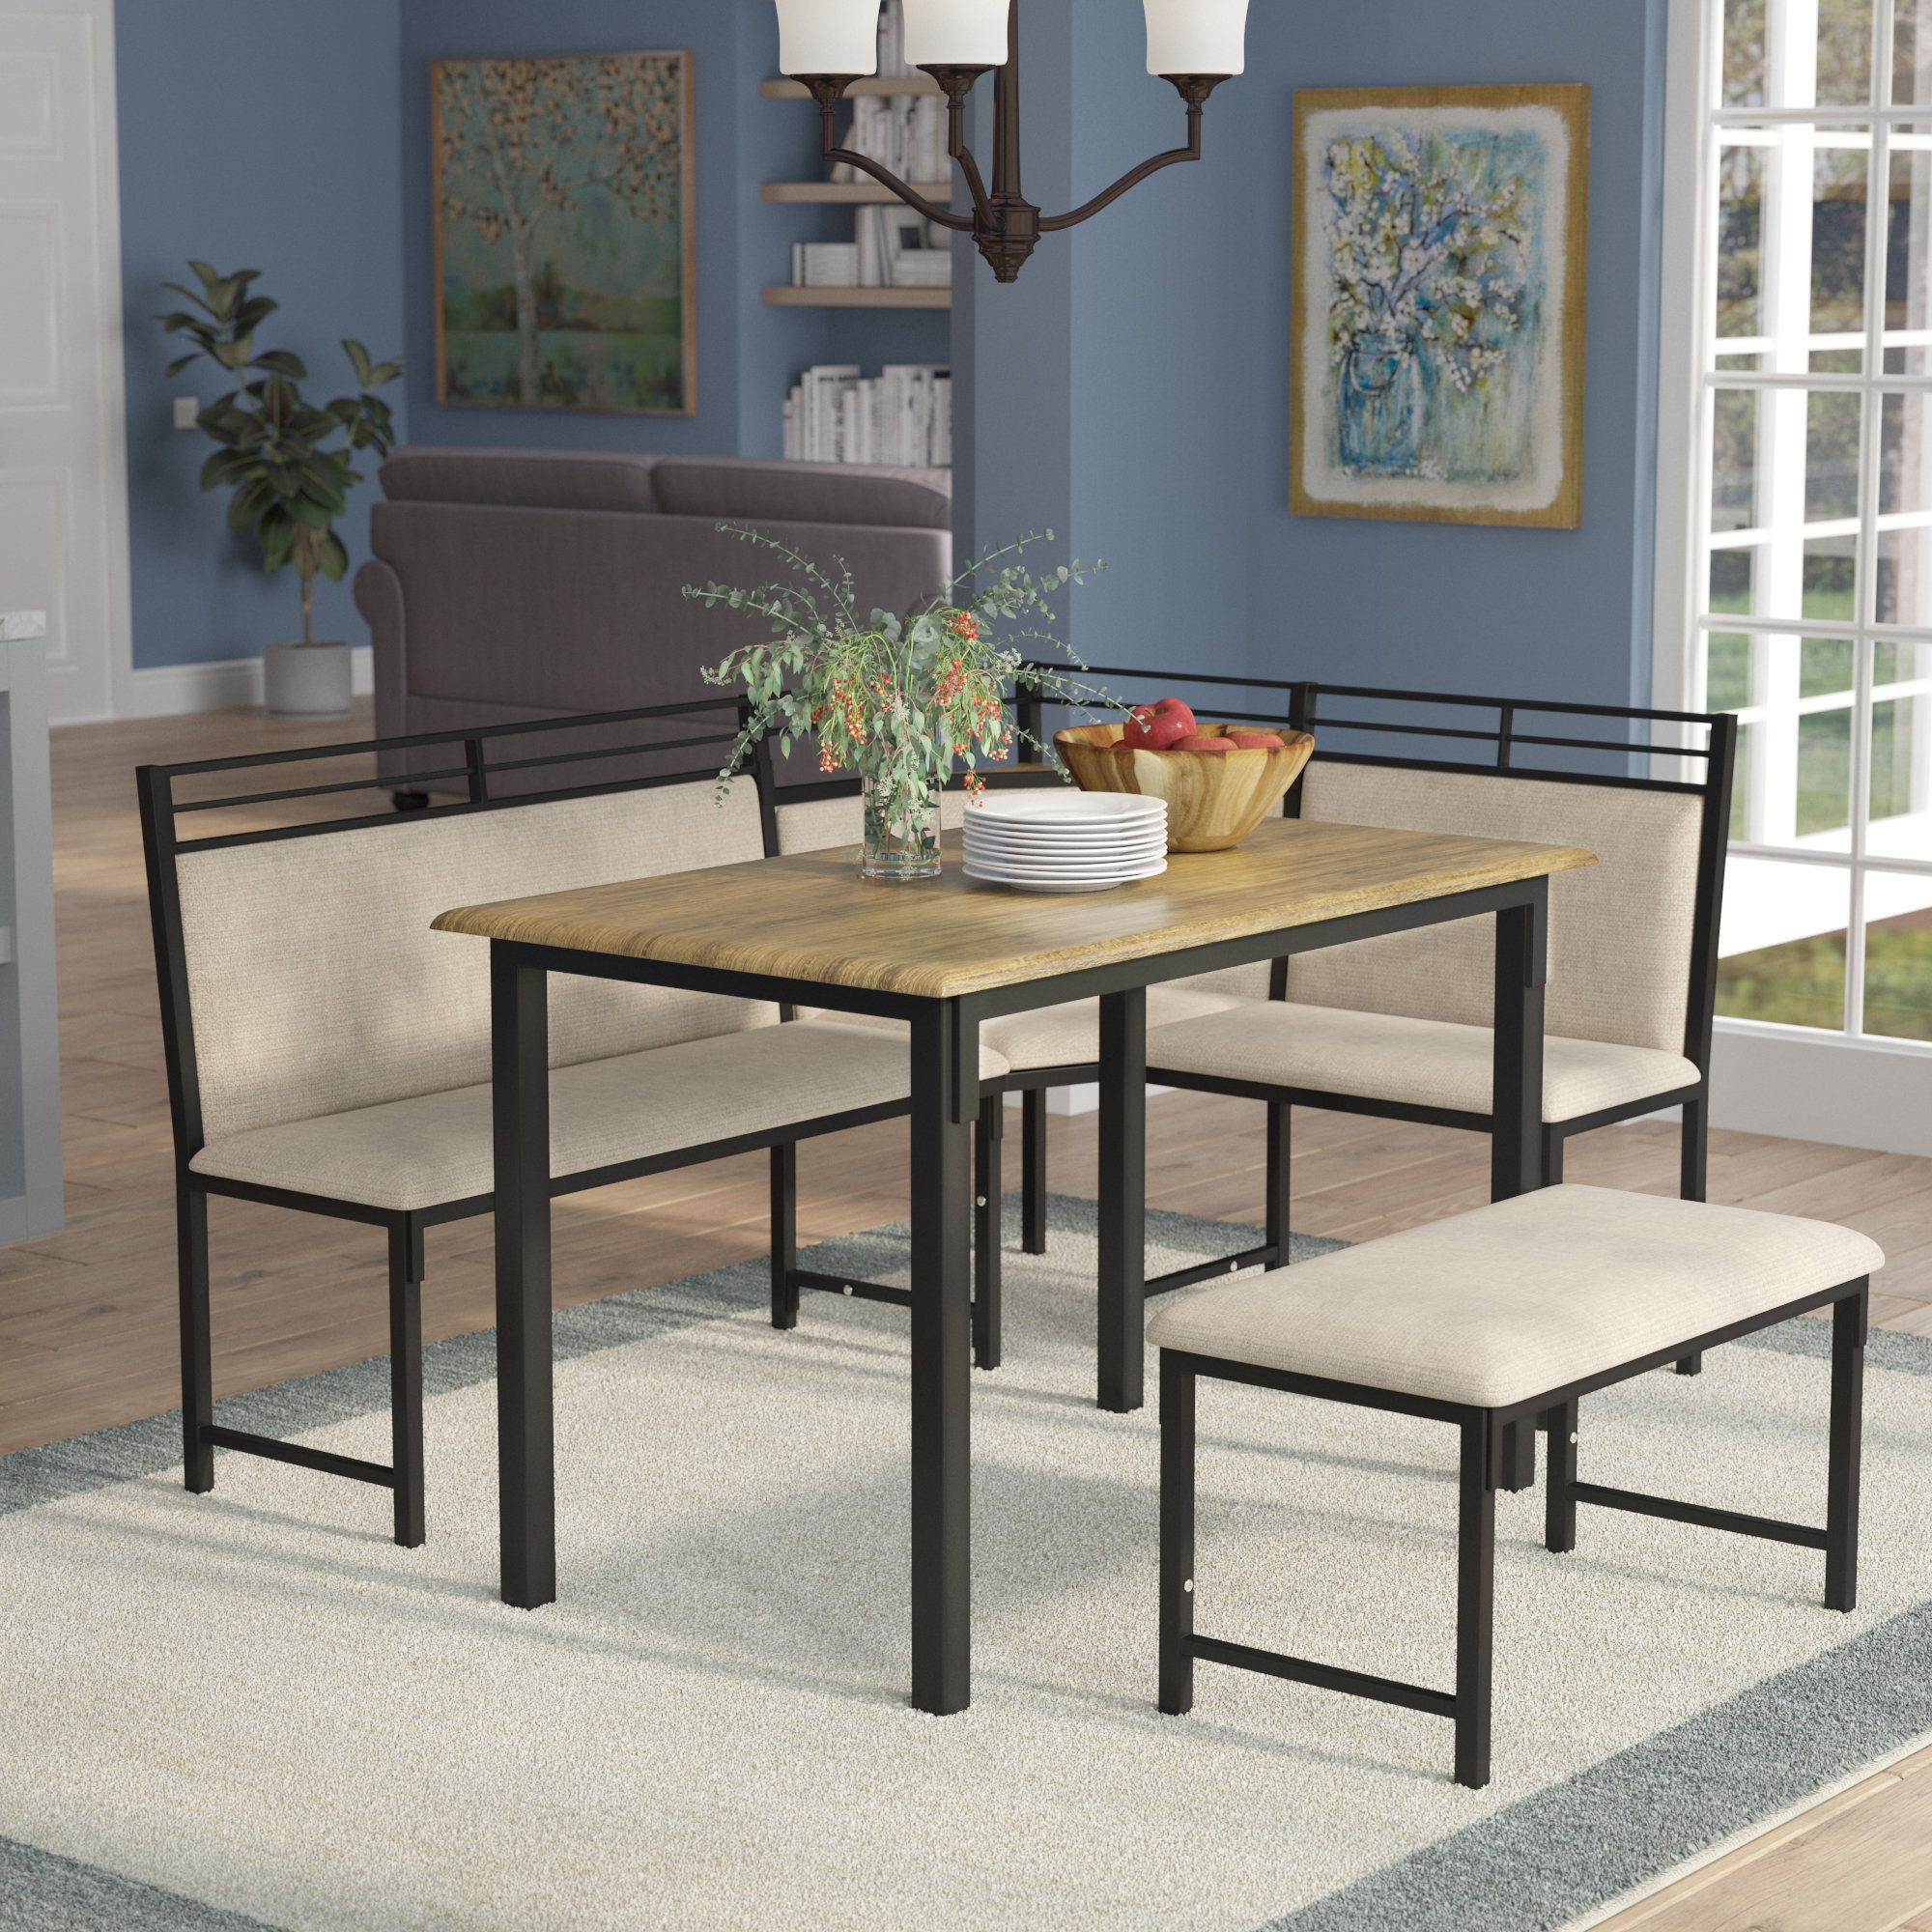 Moonachie Corner 3 Piece Dining Set Within 2018 Bearden 3 Piece Dining Sets (View 9 of 20)